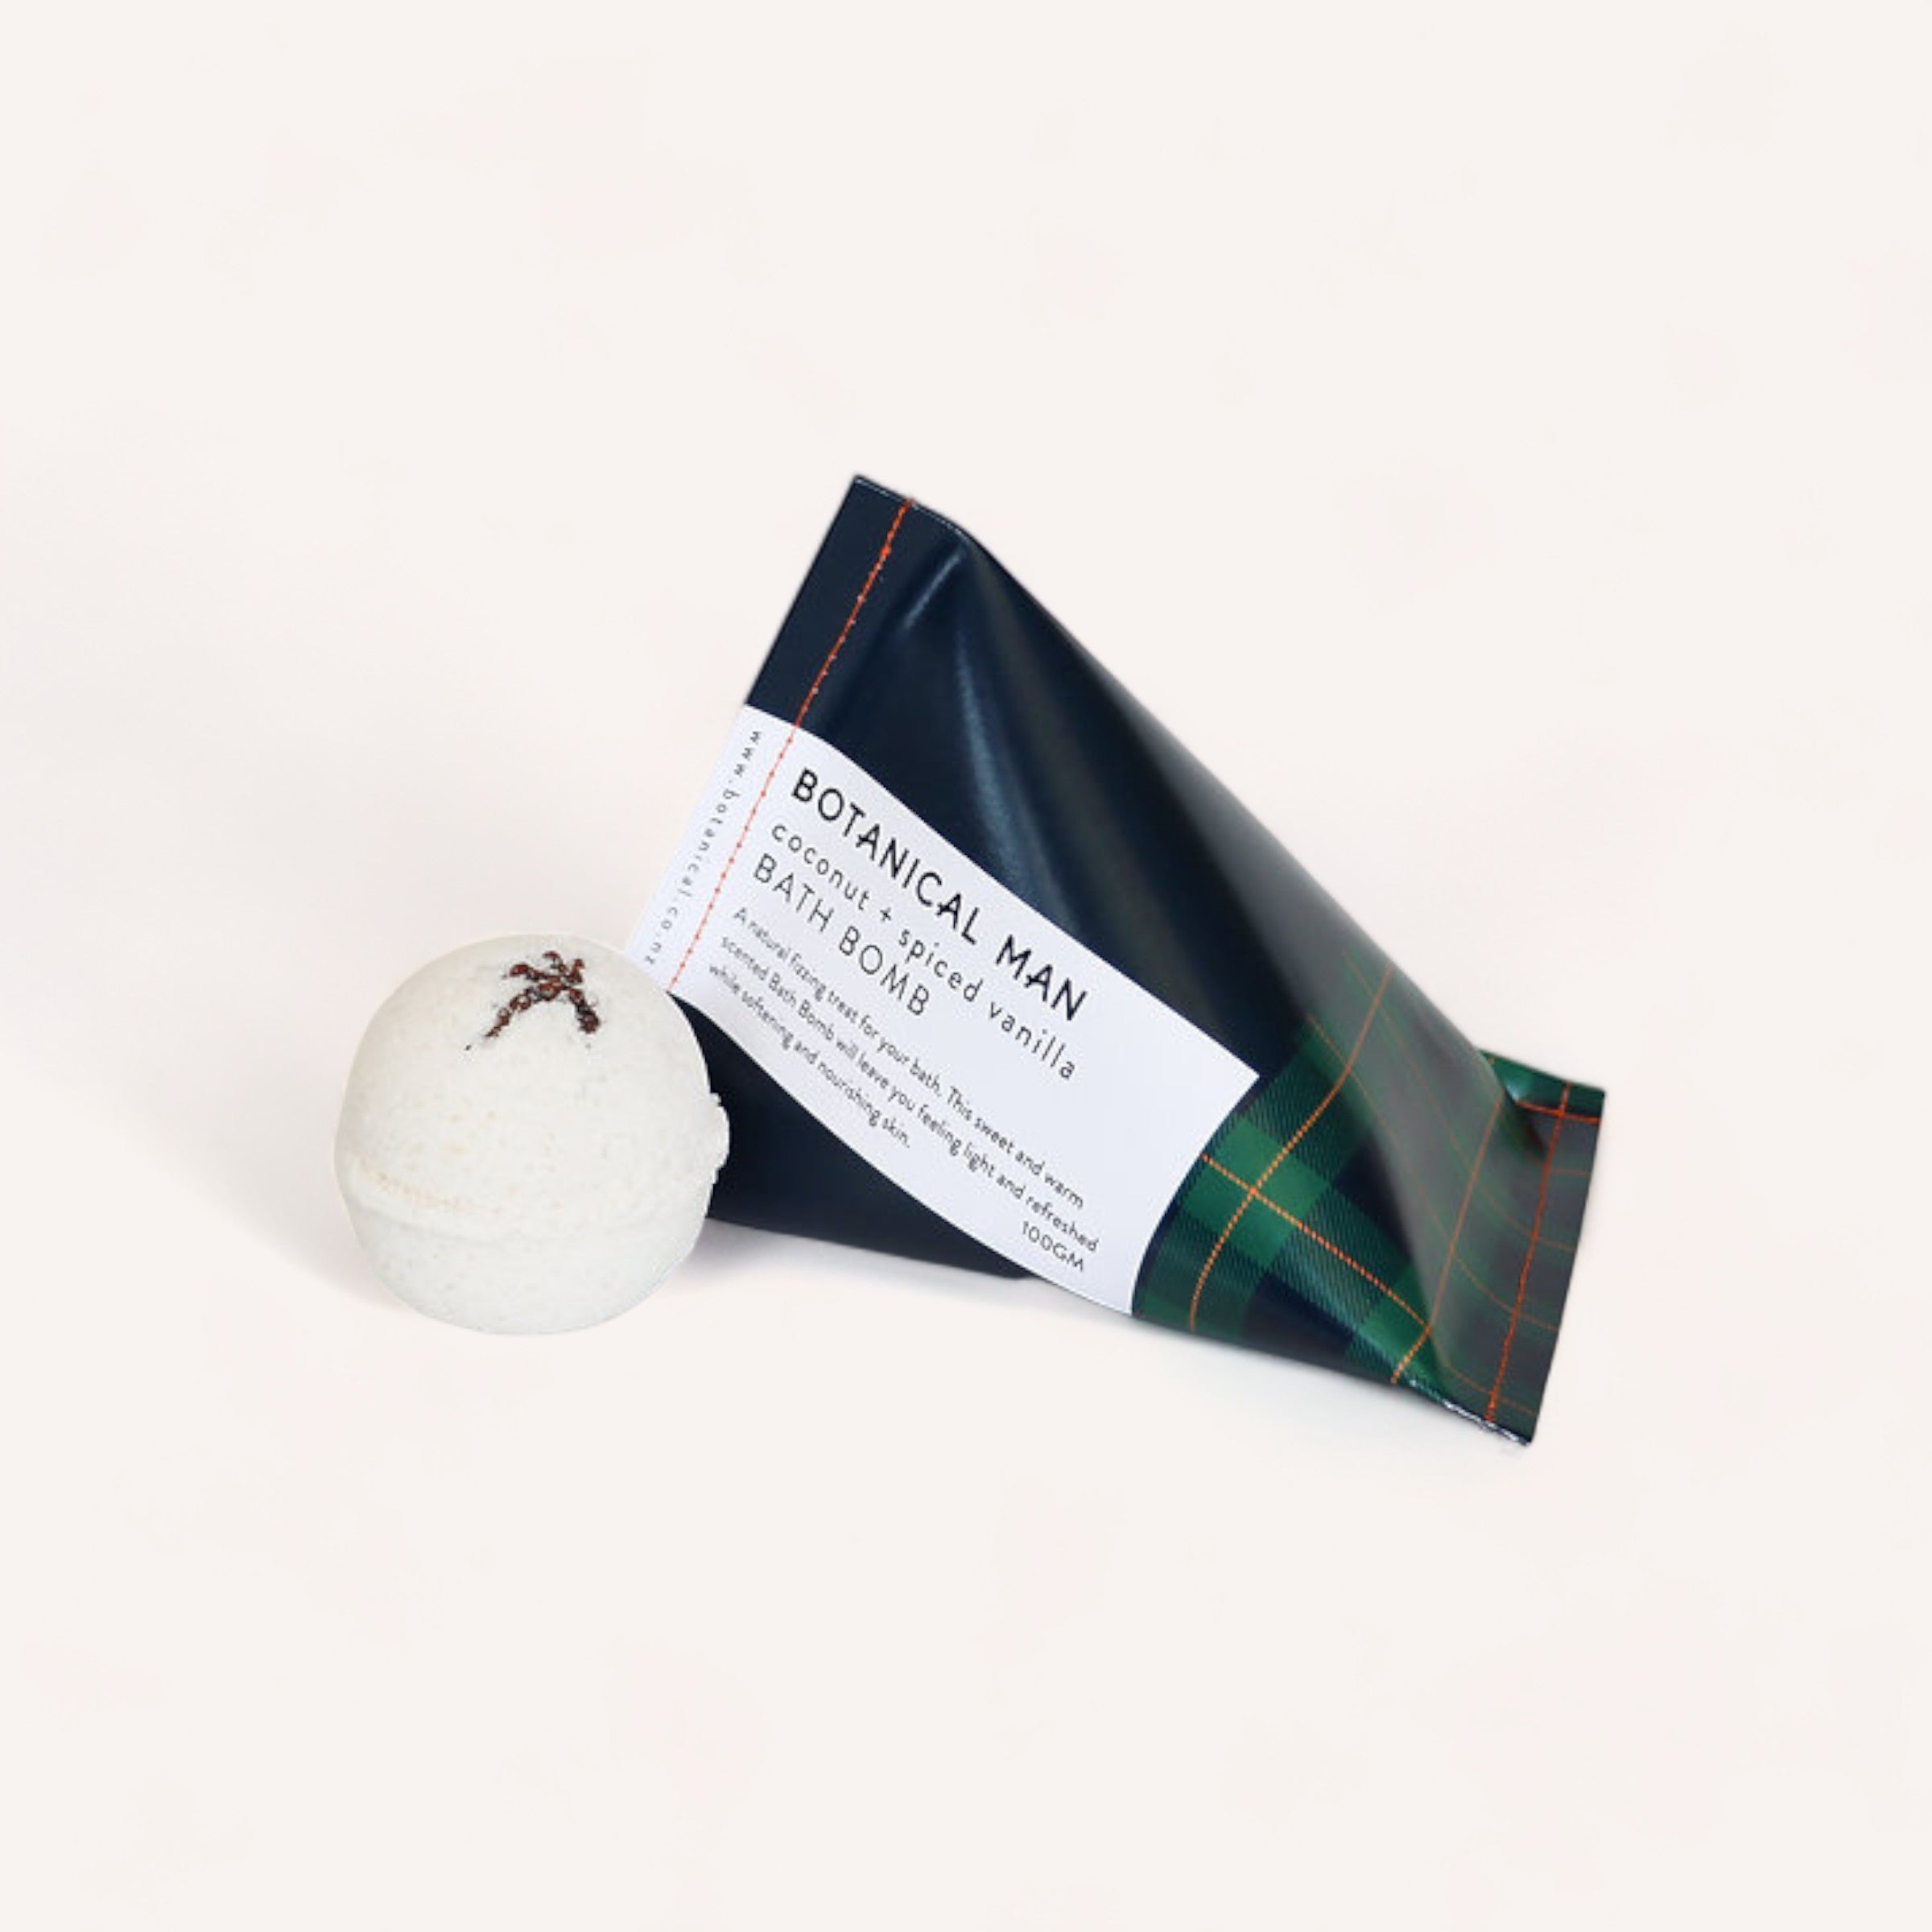 A Botanical Man Bath Bomb by Botanical Skin Care accompanied by its packaging that reads "botanical man - fragrant coconut & vanilla bath bomb" on a clean white background.